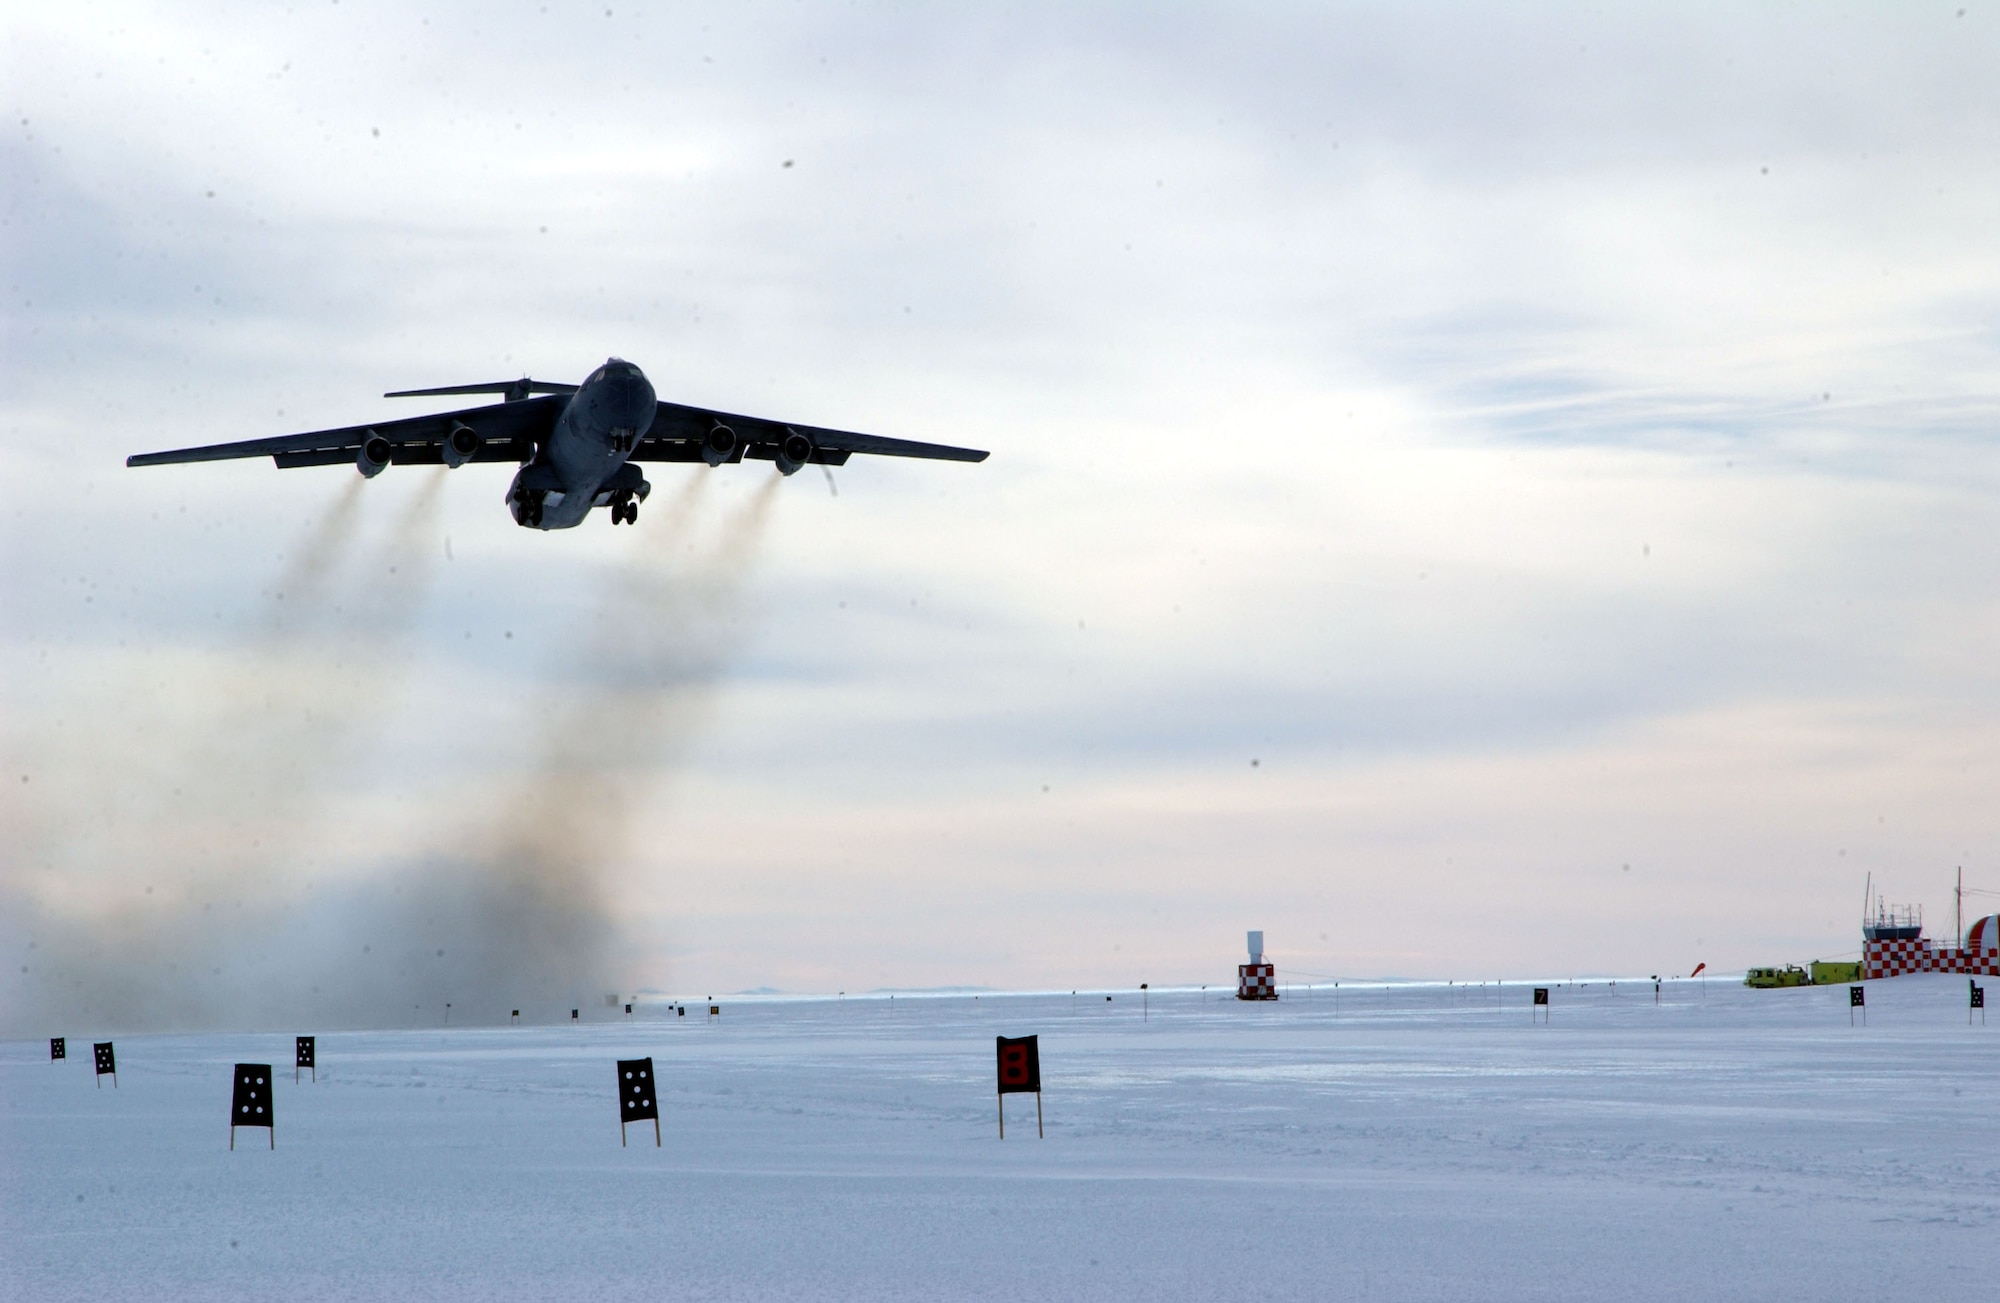 MCMURDO STATION, Antarctica -- A C-141 Starlifter takes off from here after delivering cargo and people for the National Science Foundation.  Starlifters from the 445th Airlift Wing at Wright Patterson Air Force Base, Ohio, and the 452nd Air Mobility Wing at March Air Reserve Base, Calif., were here supporting Operation Deep Freeze.  (U.S. Air Force photo by Tech. Sgt. Lee Harshman)